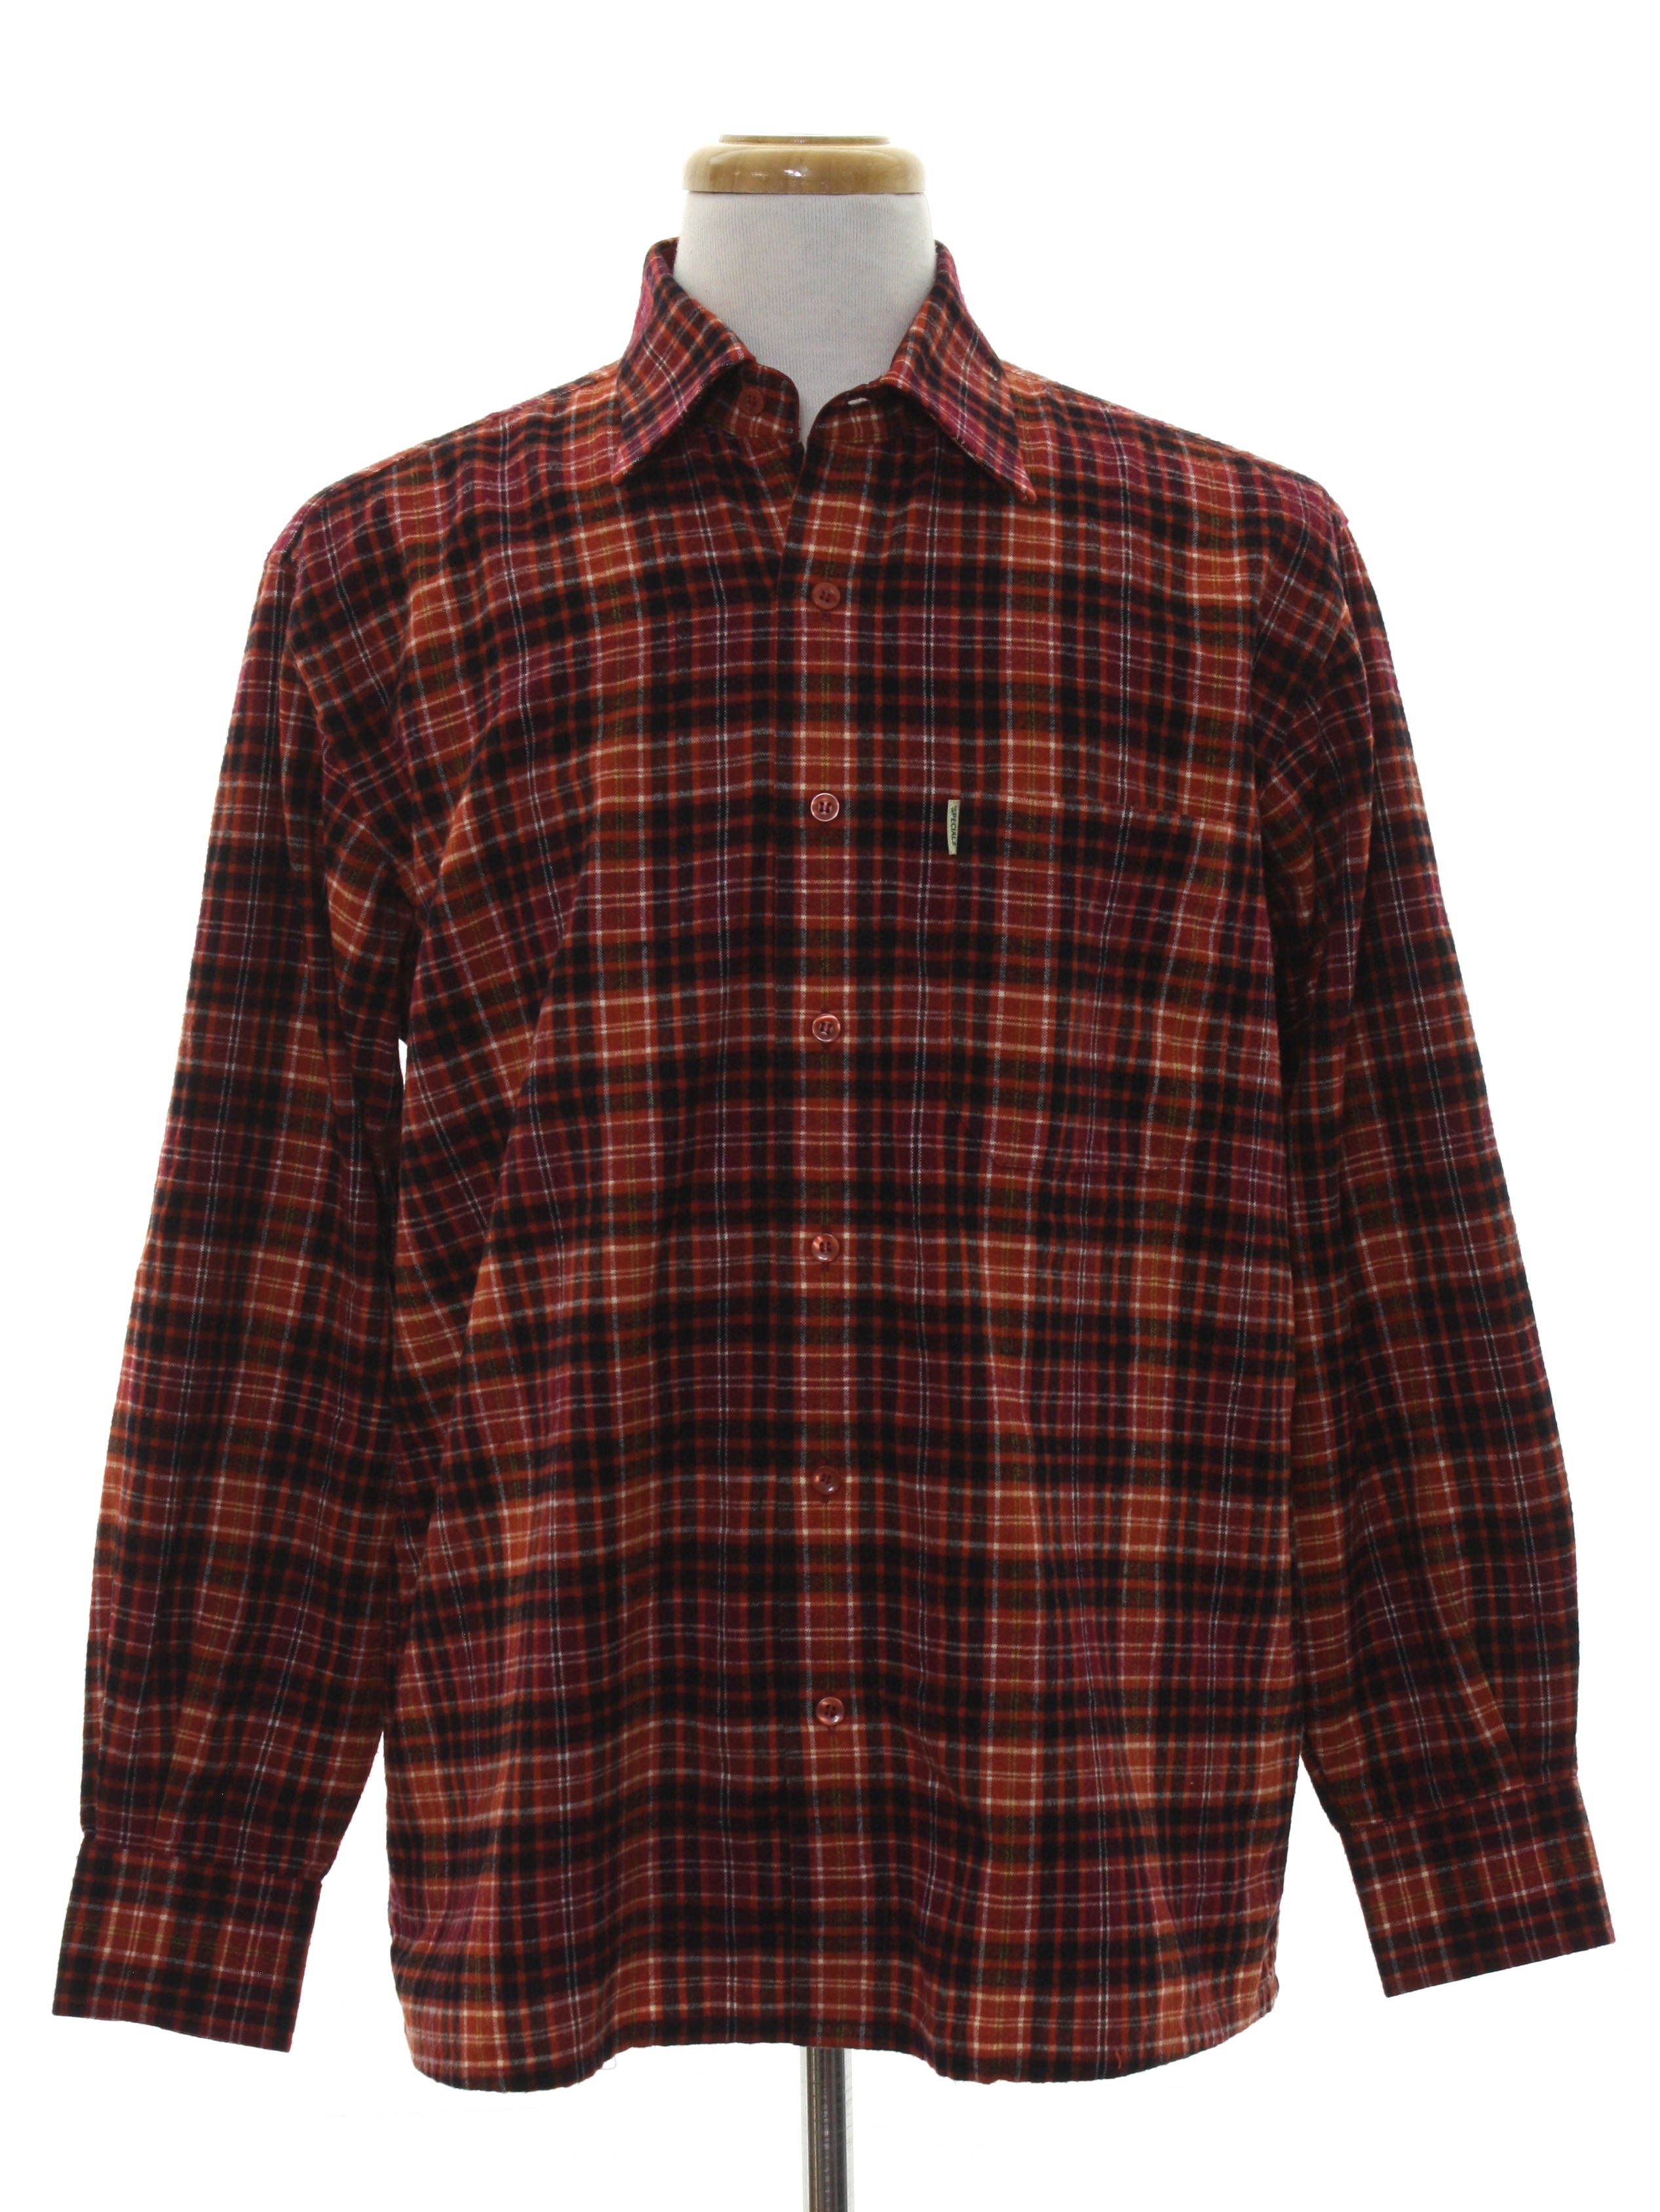 90's Specials Shirt: 90s or newer -Specials- Mens small checkered print ...